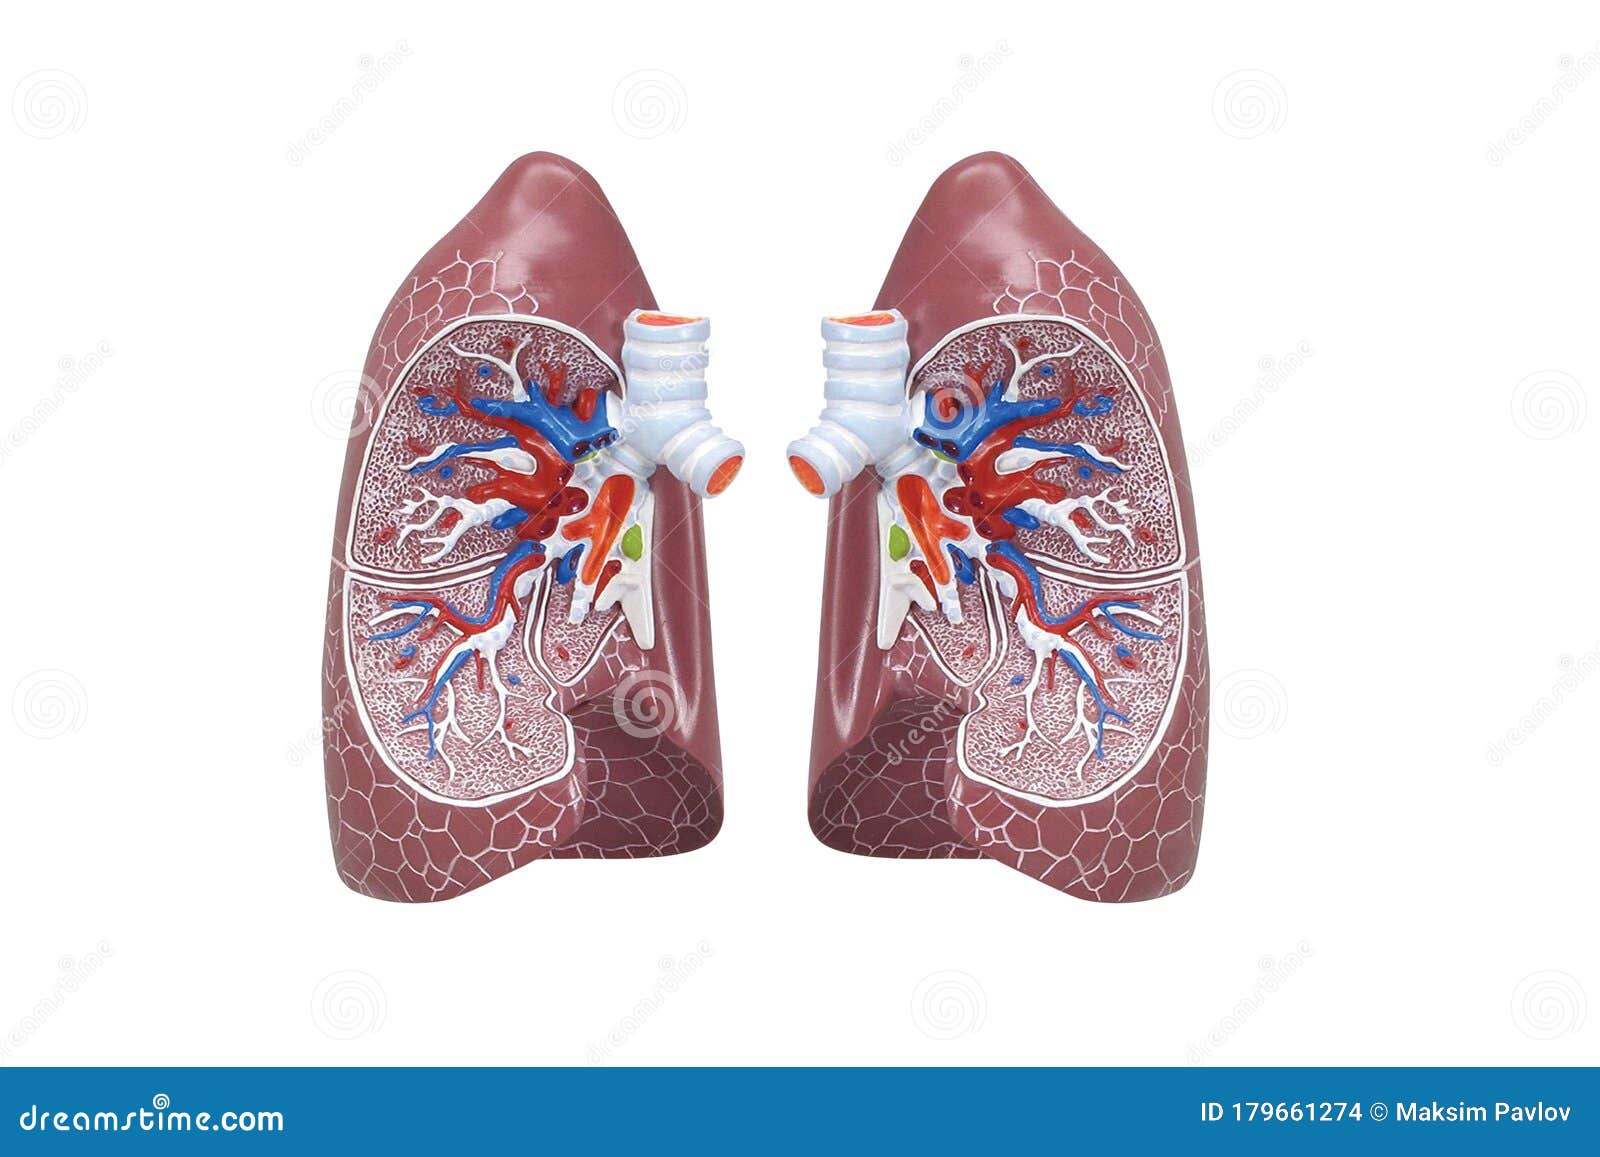 human respiratory system model is show lungs. human physical model for education of anatomy.3d render medical lung inner structure